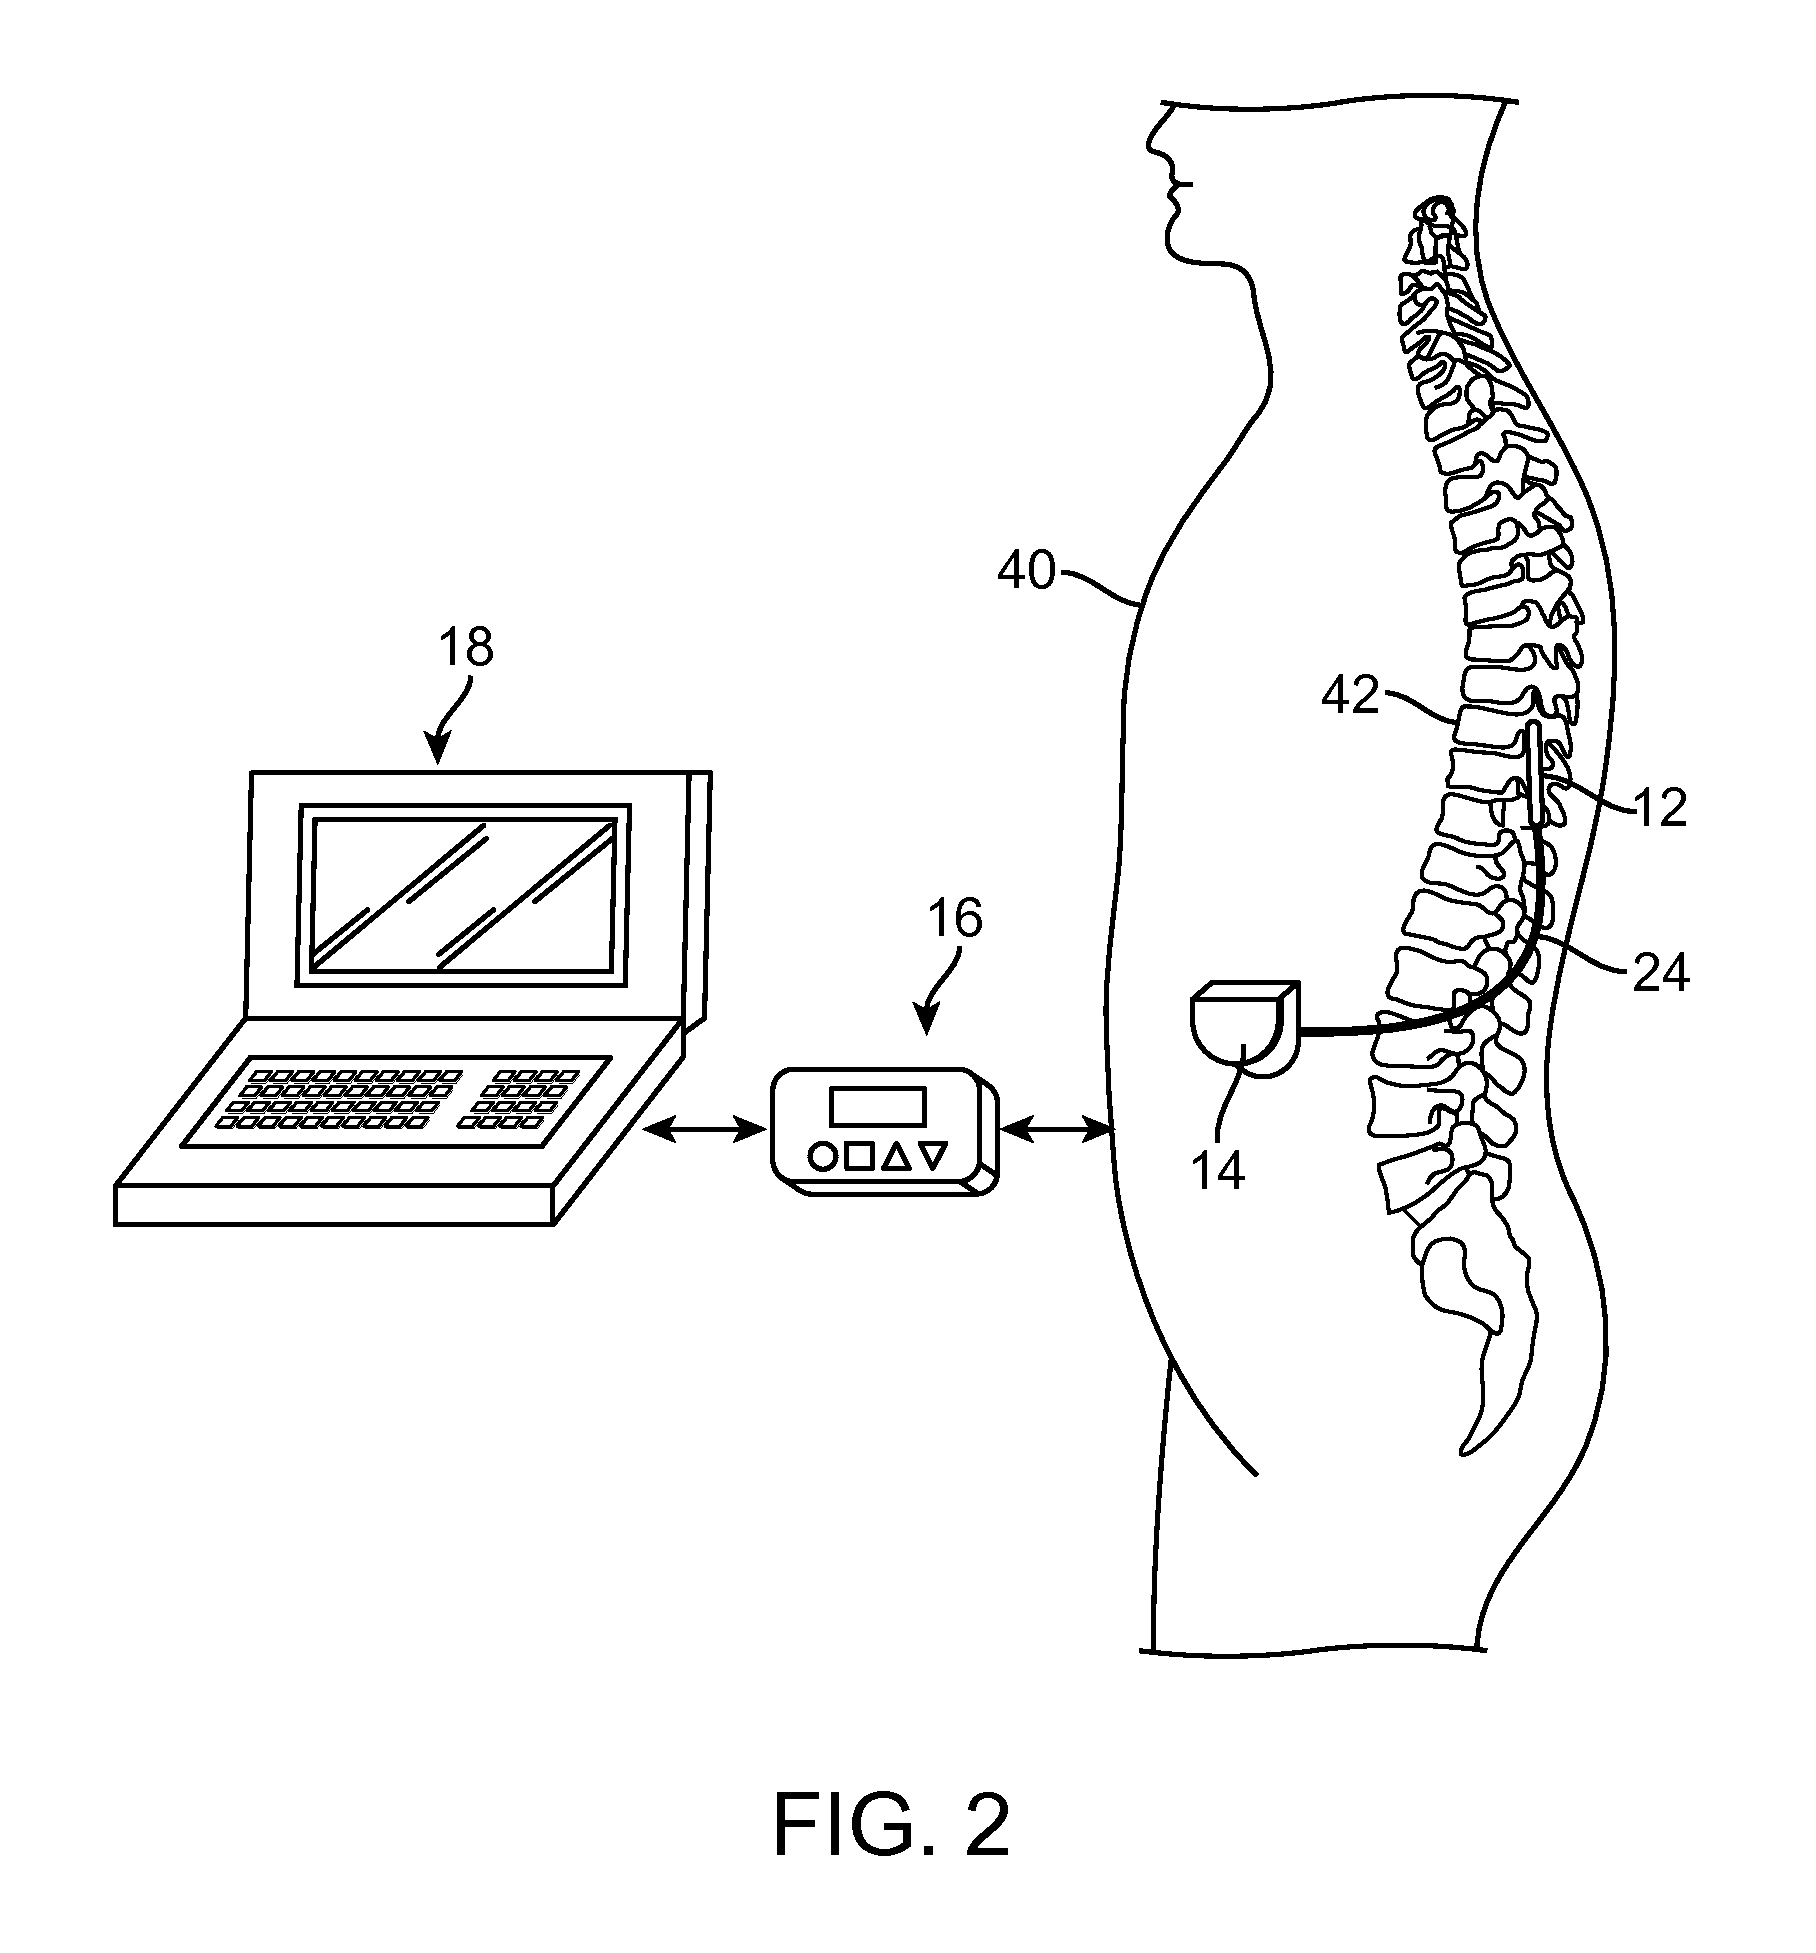 Method for selectively modulating neural elements in the dorsal horn